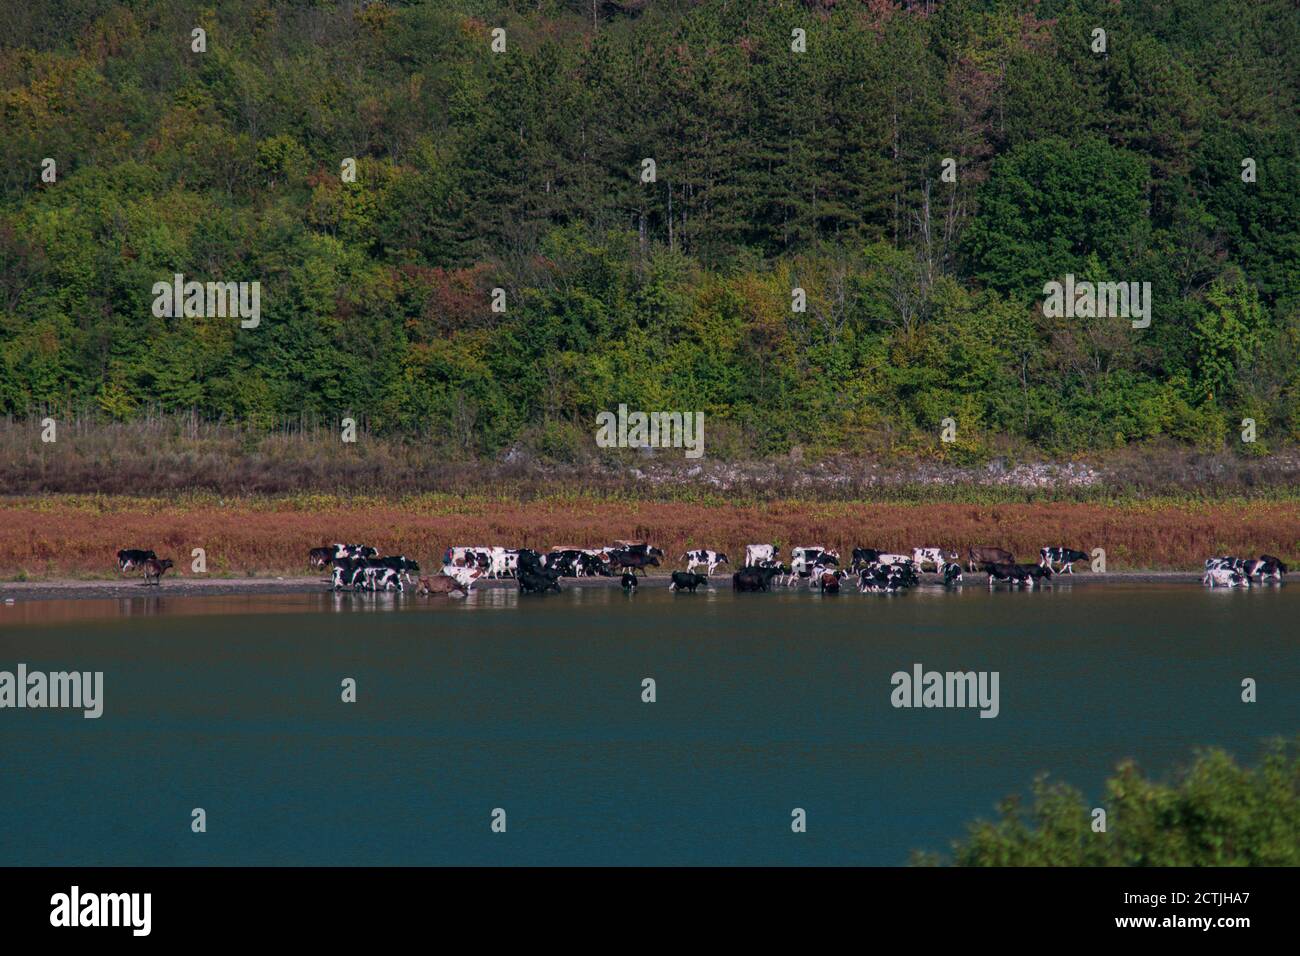 A herd of cows drinking by a lake under a mountain in a sunny day. Concept: Calmness and nature Stock Photo